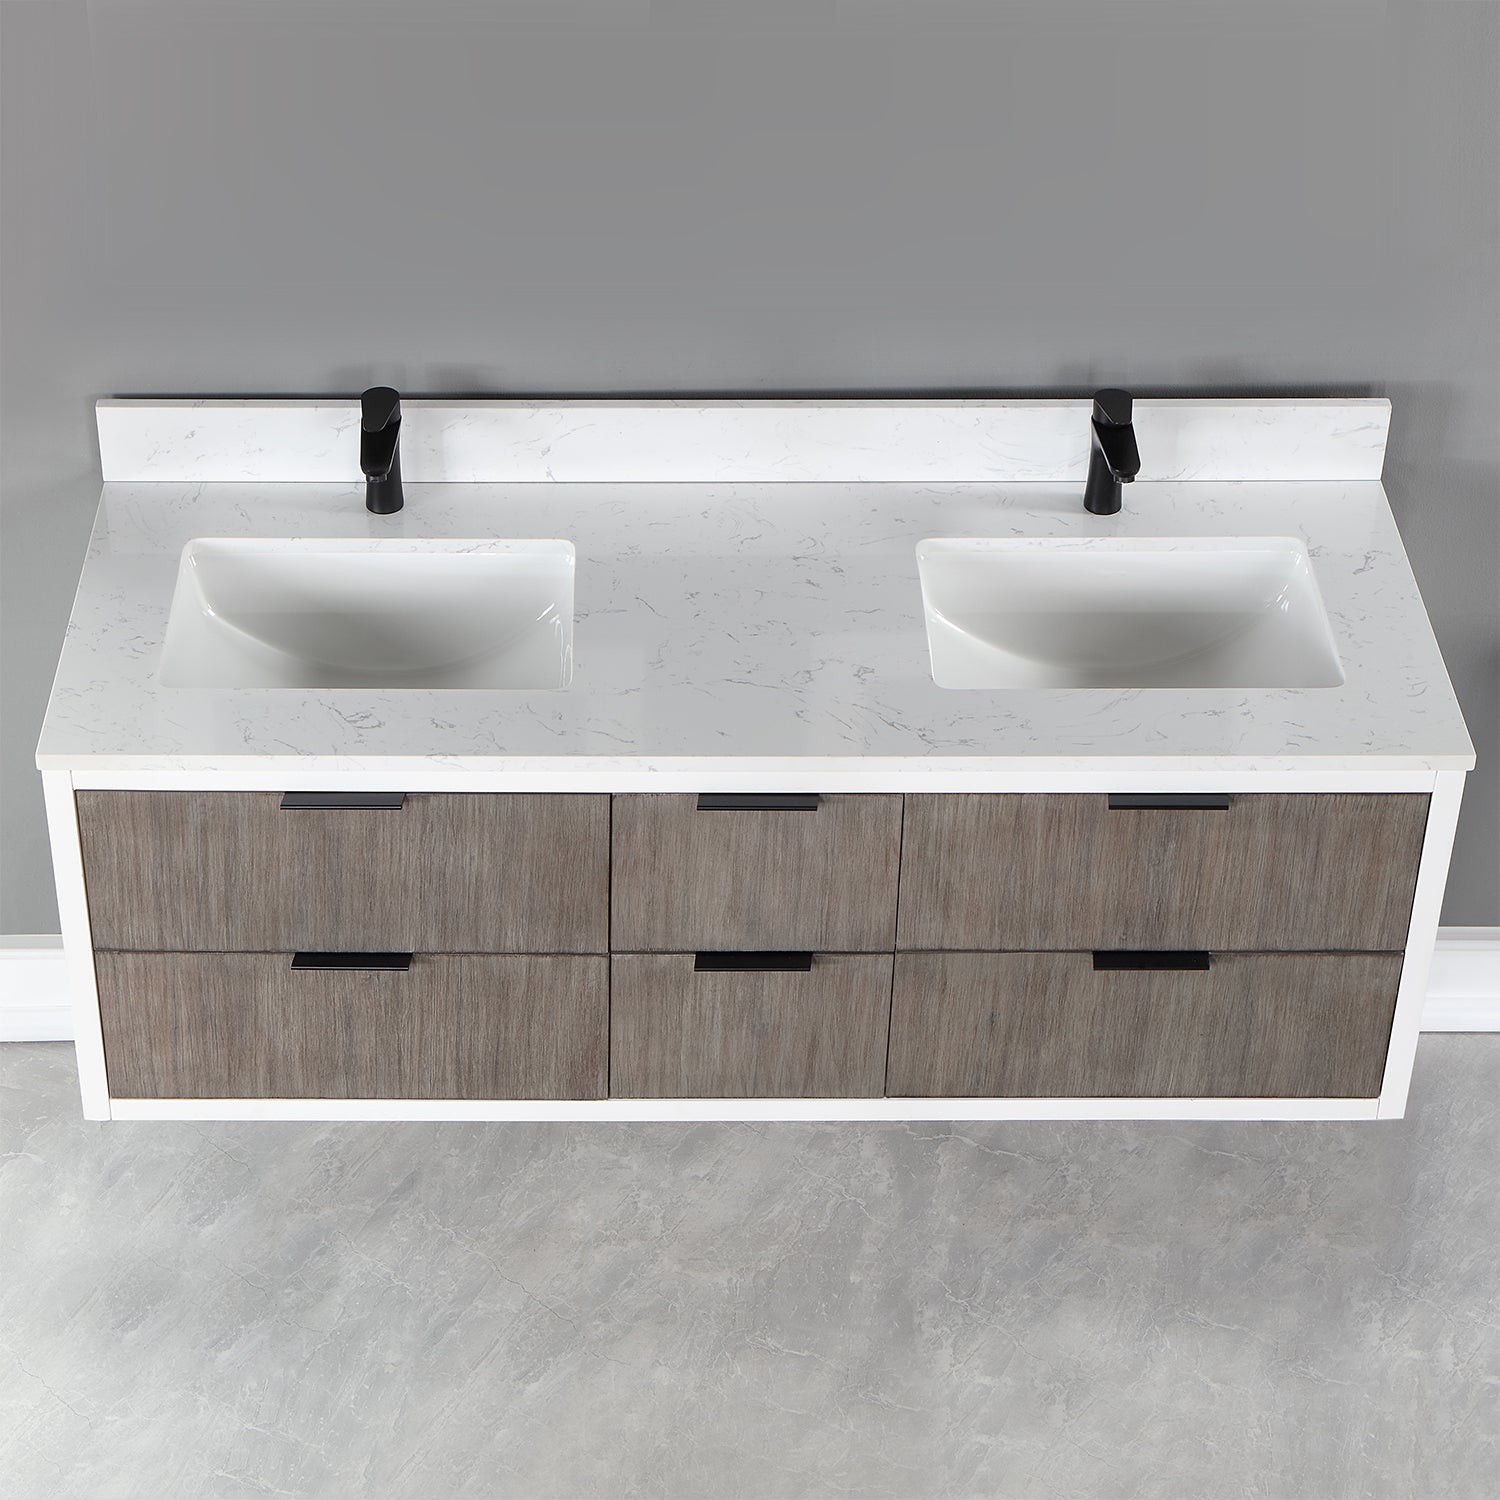 Dione 60" Double Bathroom Vanity Set with Aosta White Stone Countertop